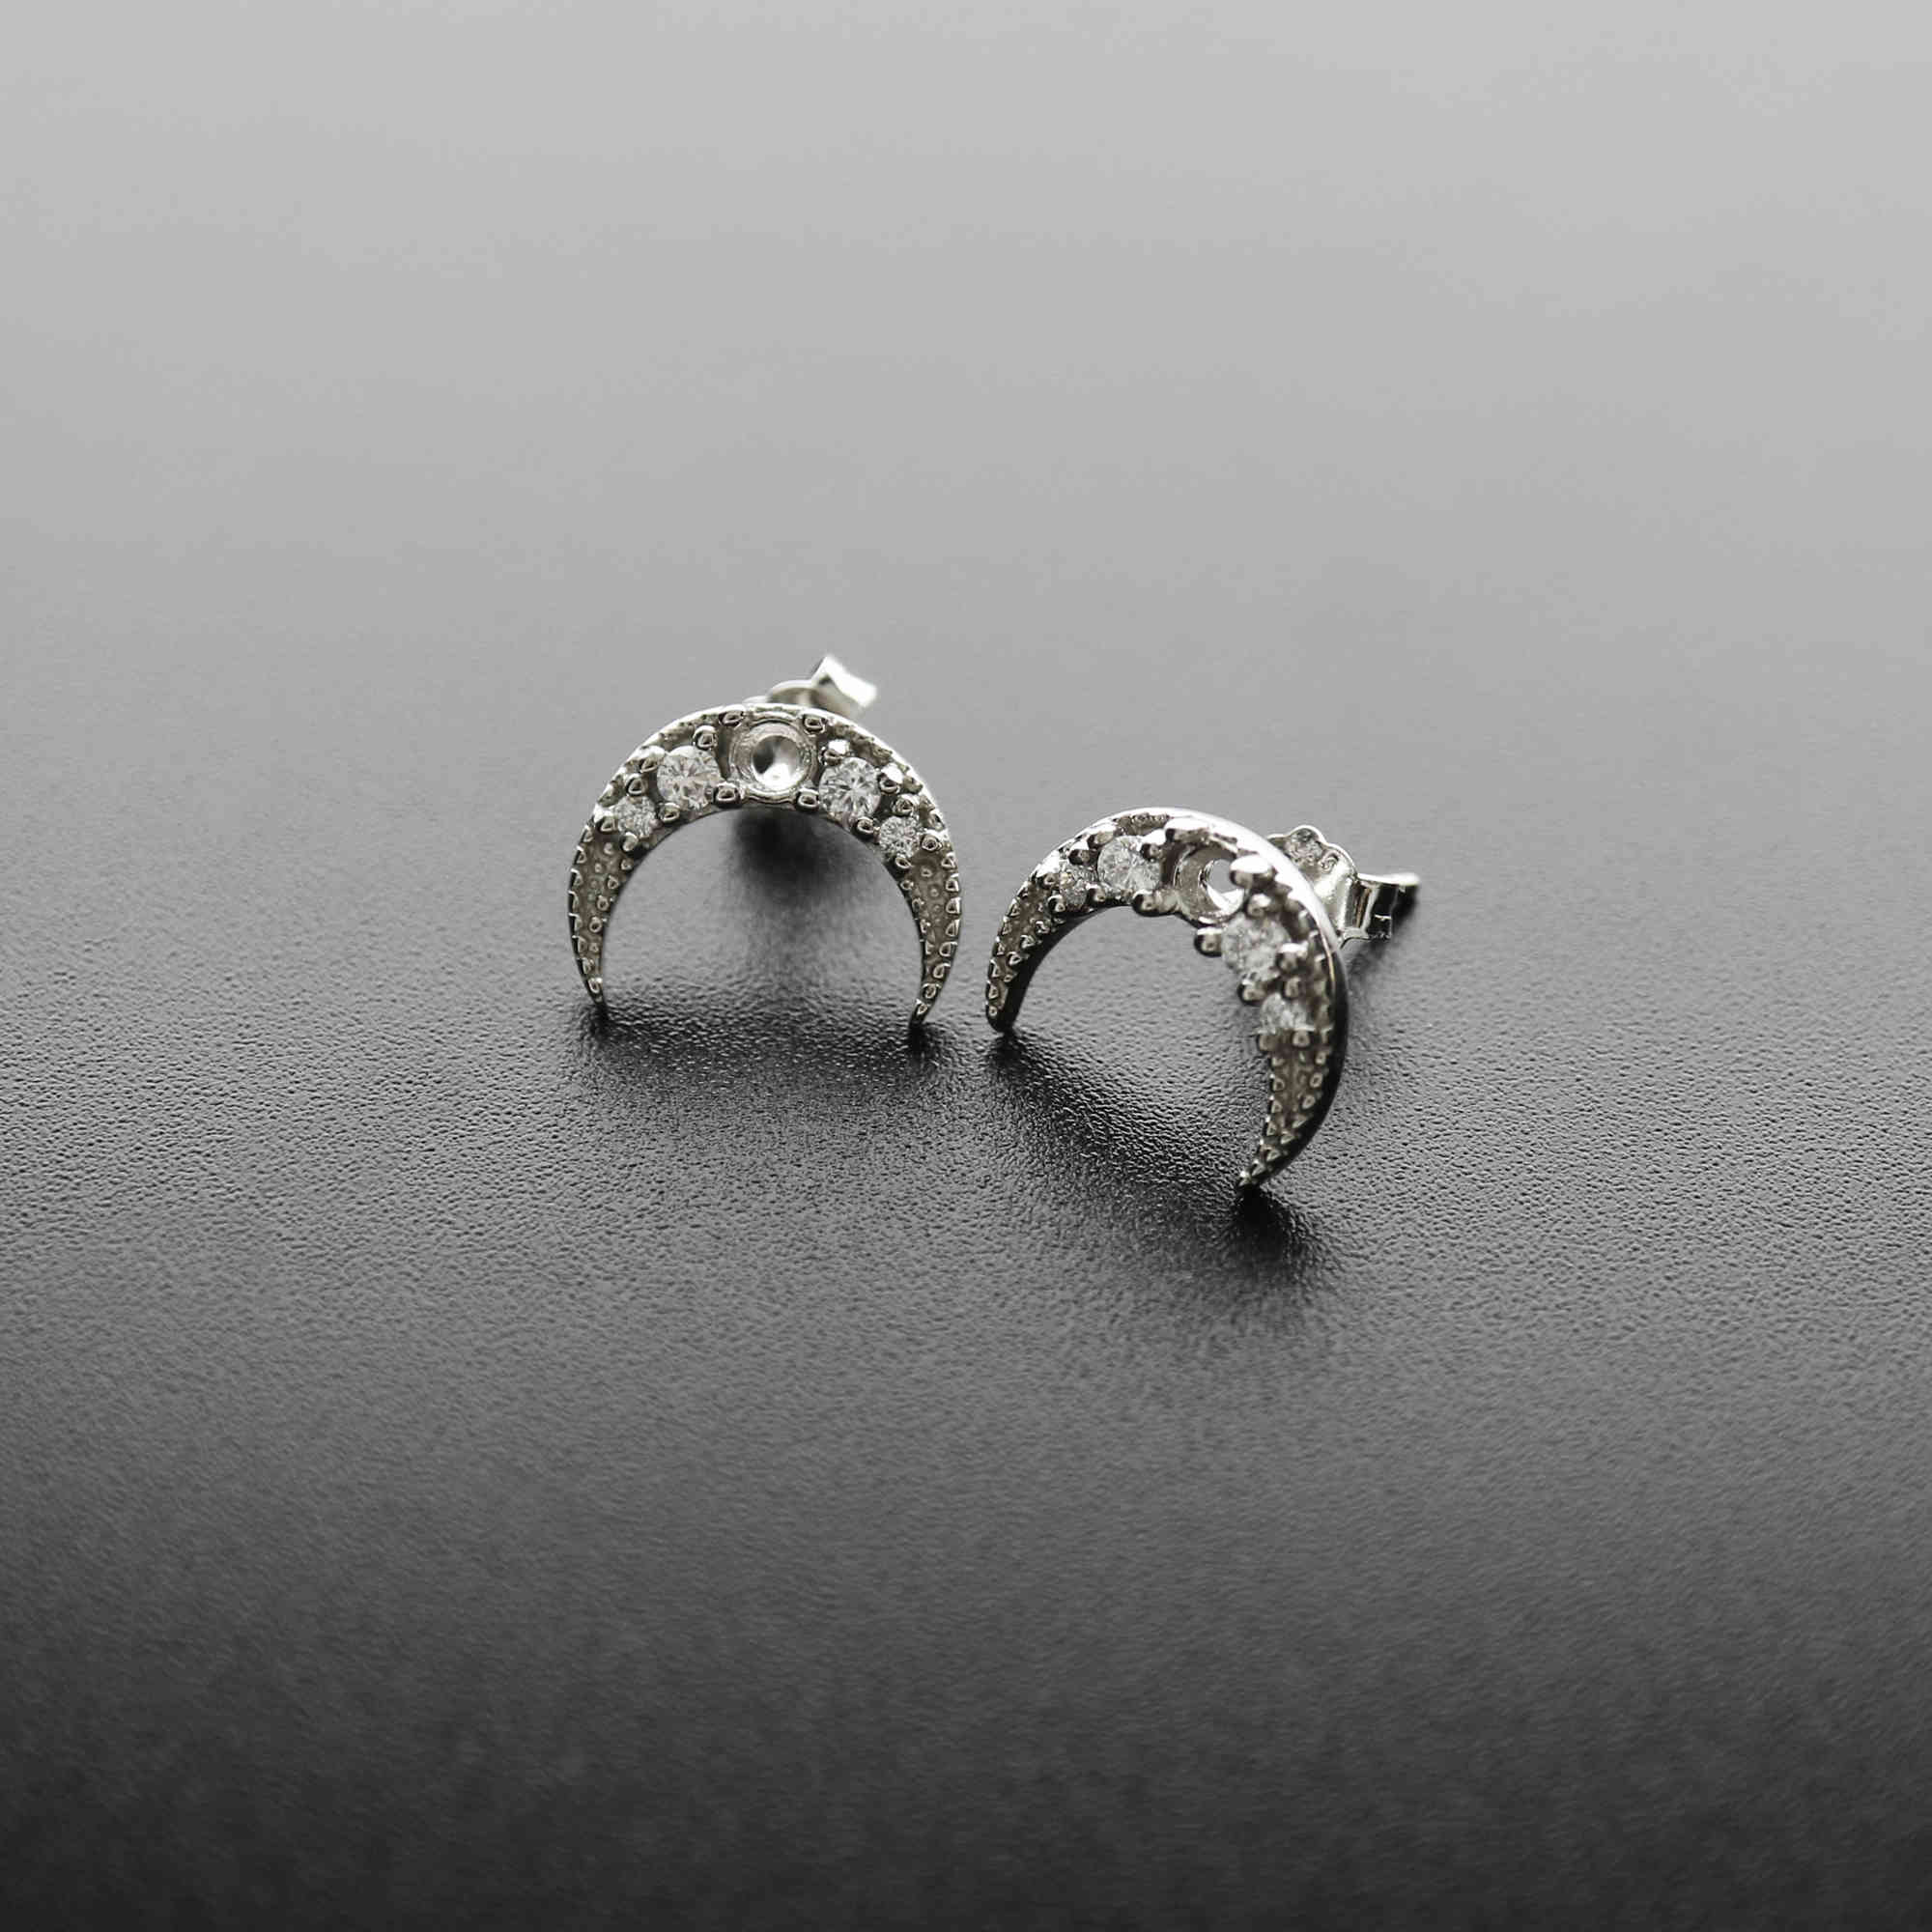 1Pair 3MM Round Bezel Solid 925 Sterling Silver Gemstone Prong Studs Earrings Settings DIY Supplies Findings Rose Gold Plated 1706034 - Click Image to Close